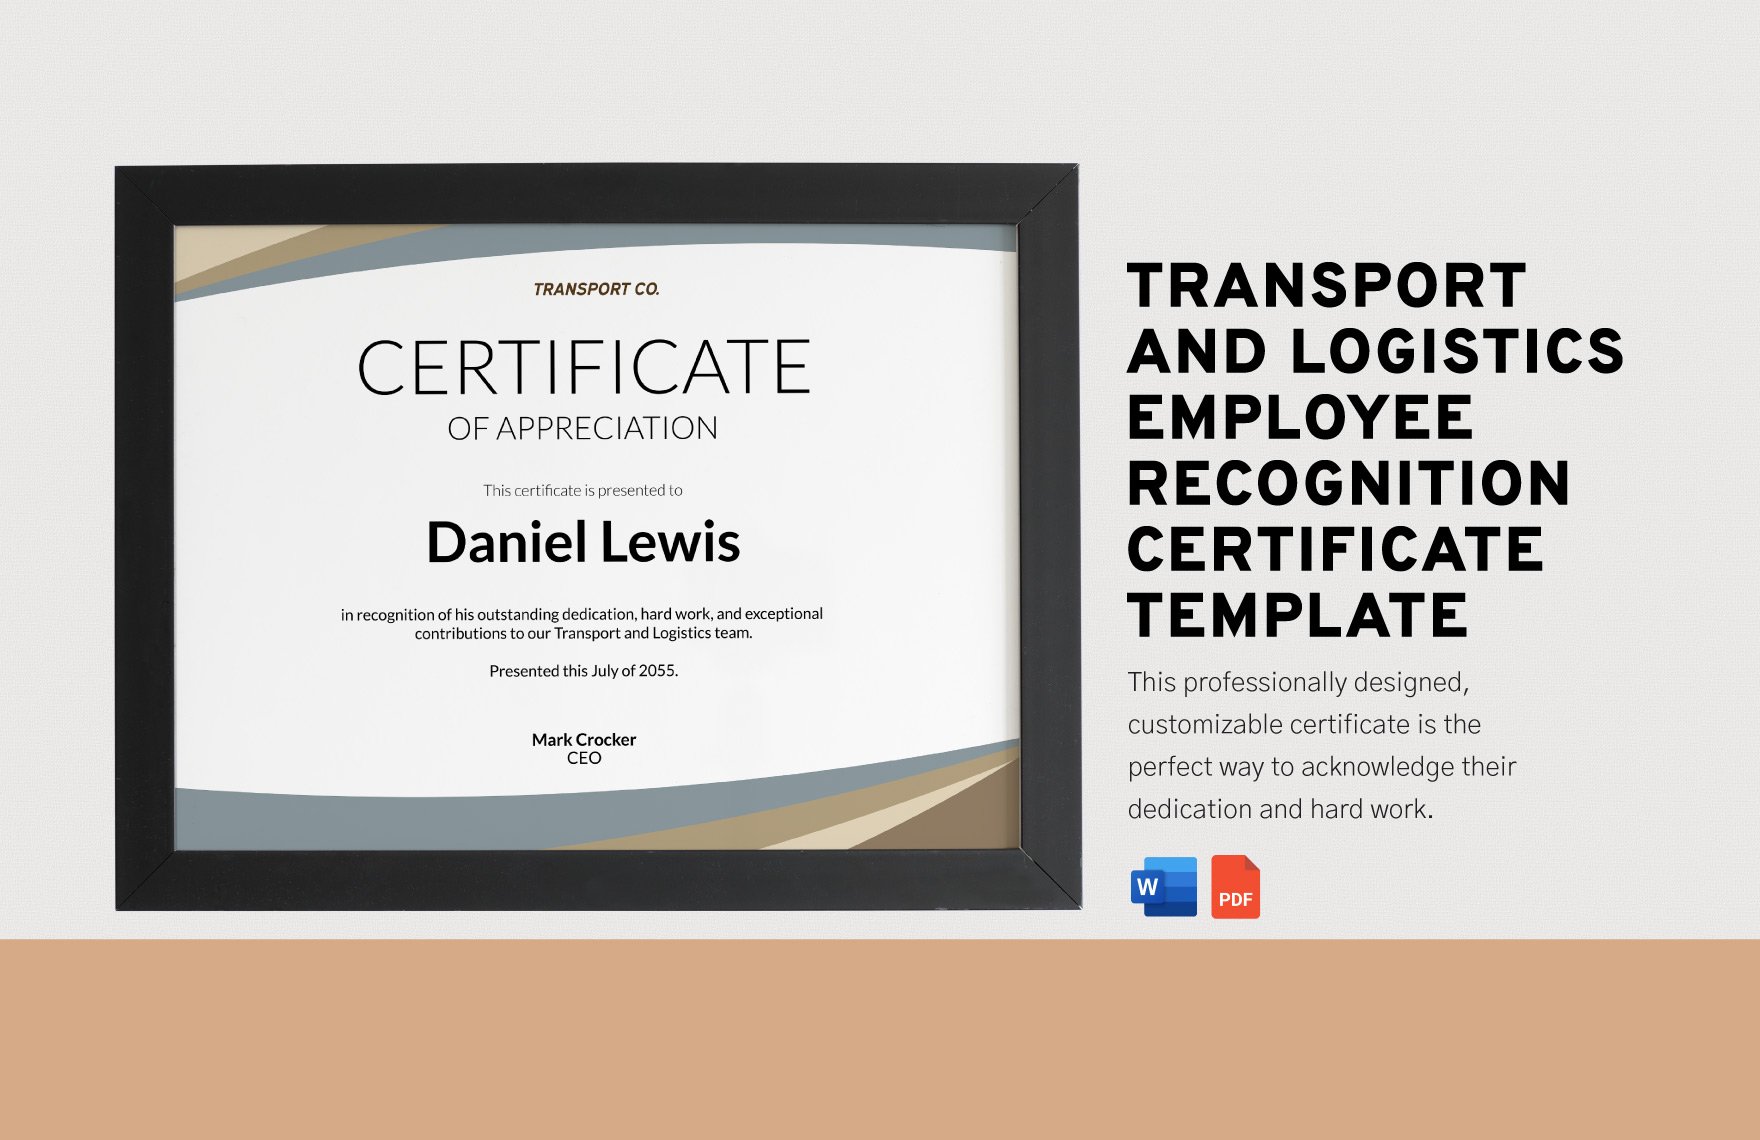 Transport and Logistics Employee Recognition Certificate Template